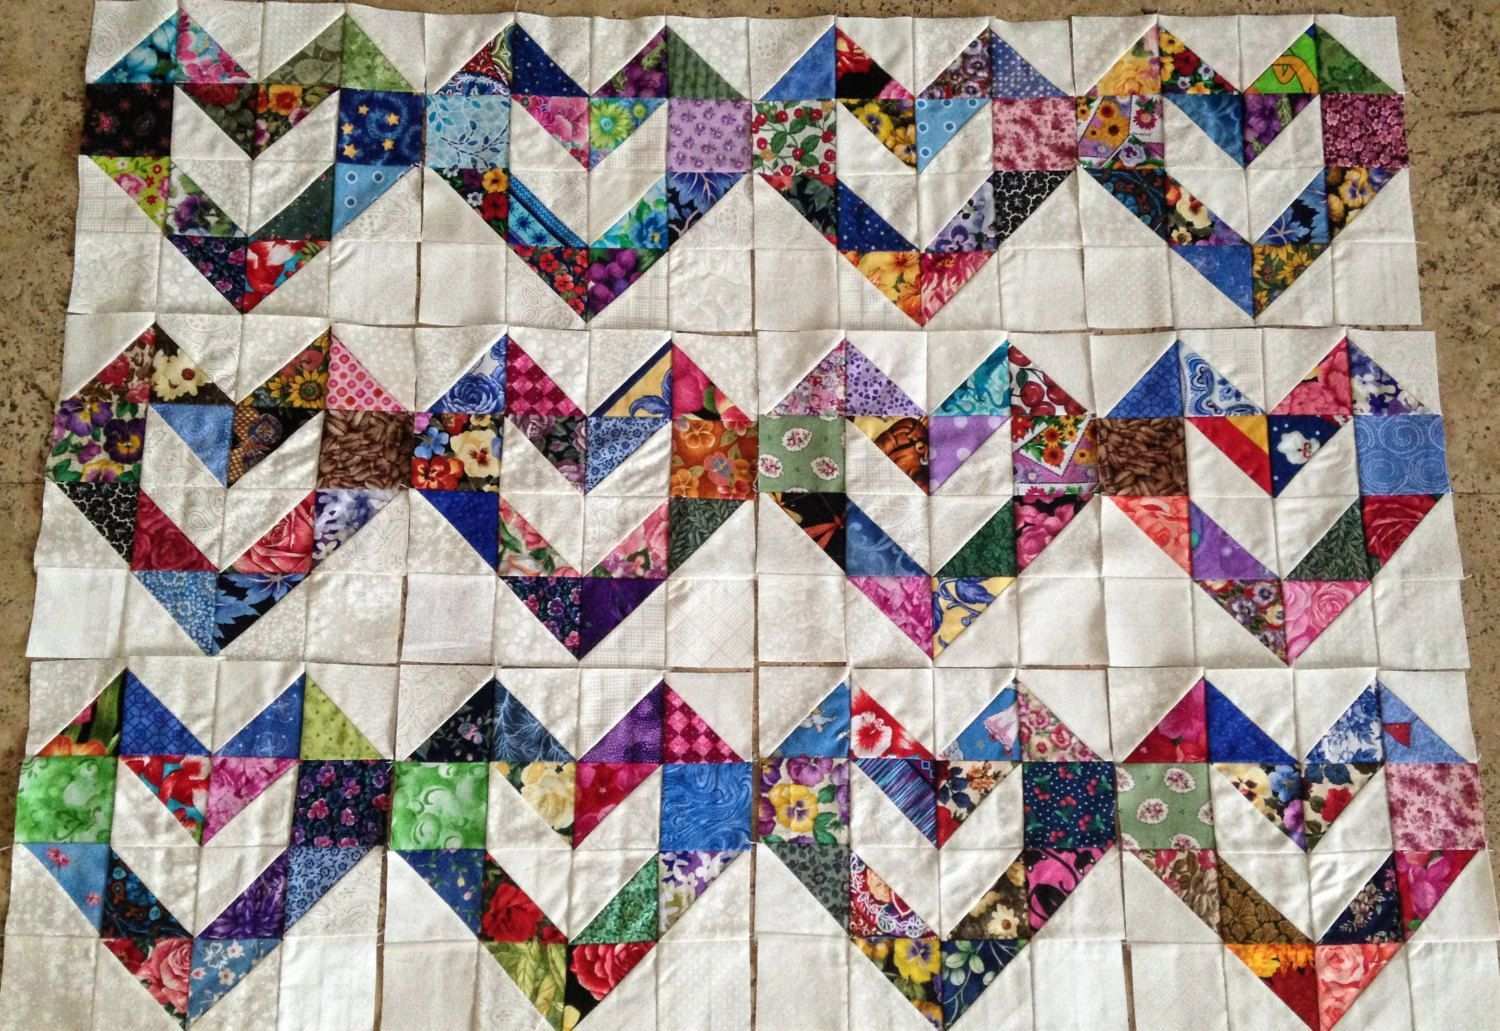 12 Color Collection Scrappy Love Hearts Quilt Top Fabric Etsy Quilt Patchworkmuster Patchwork